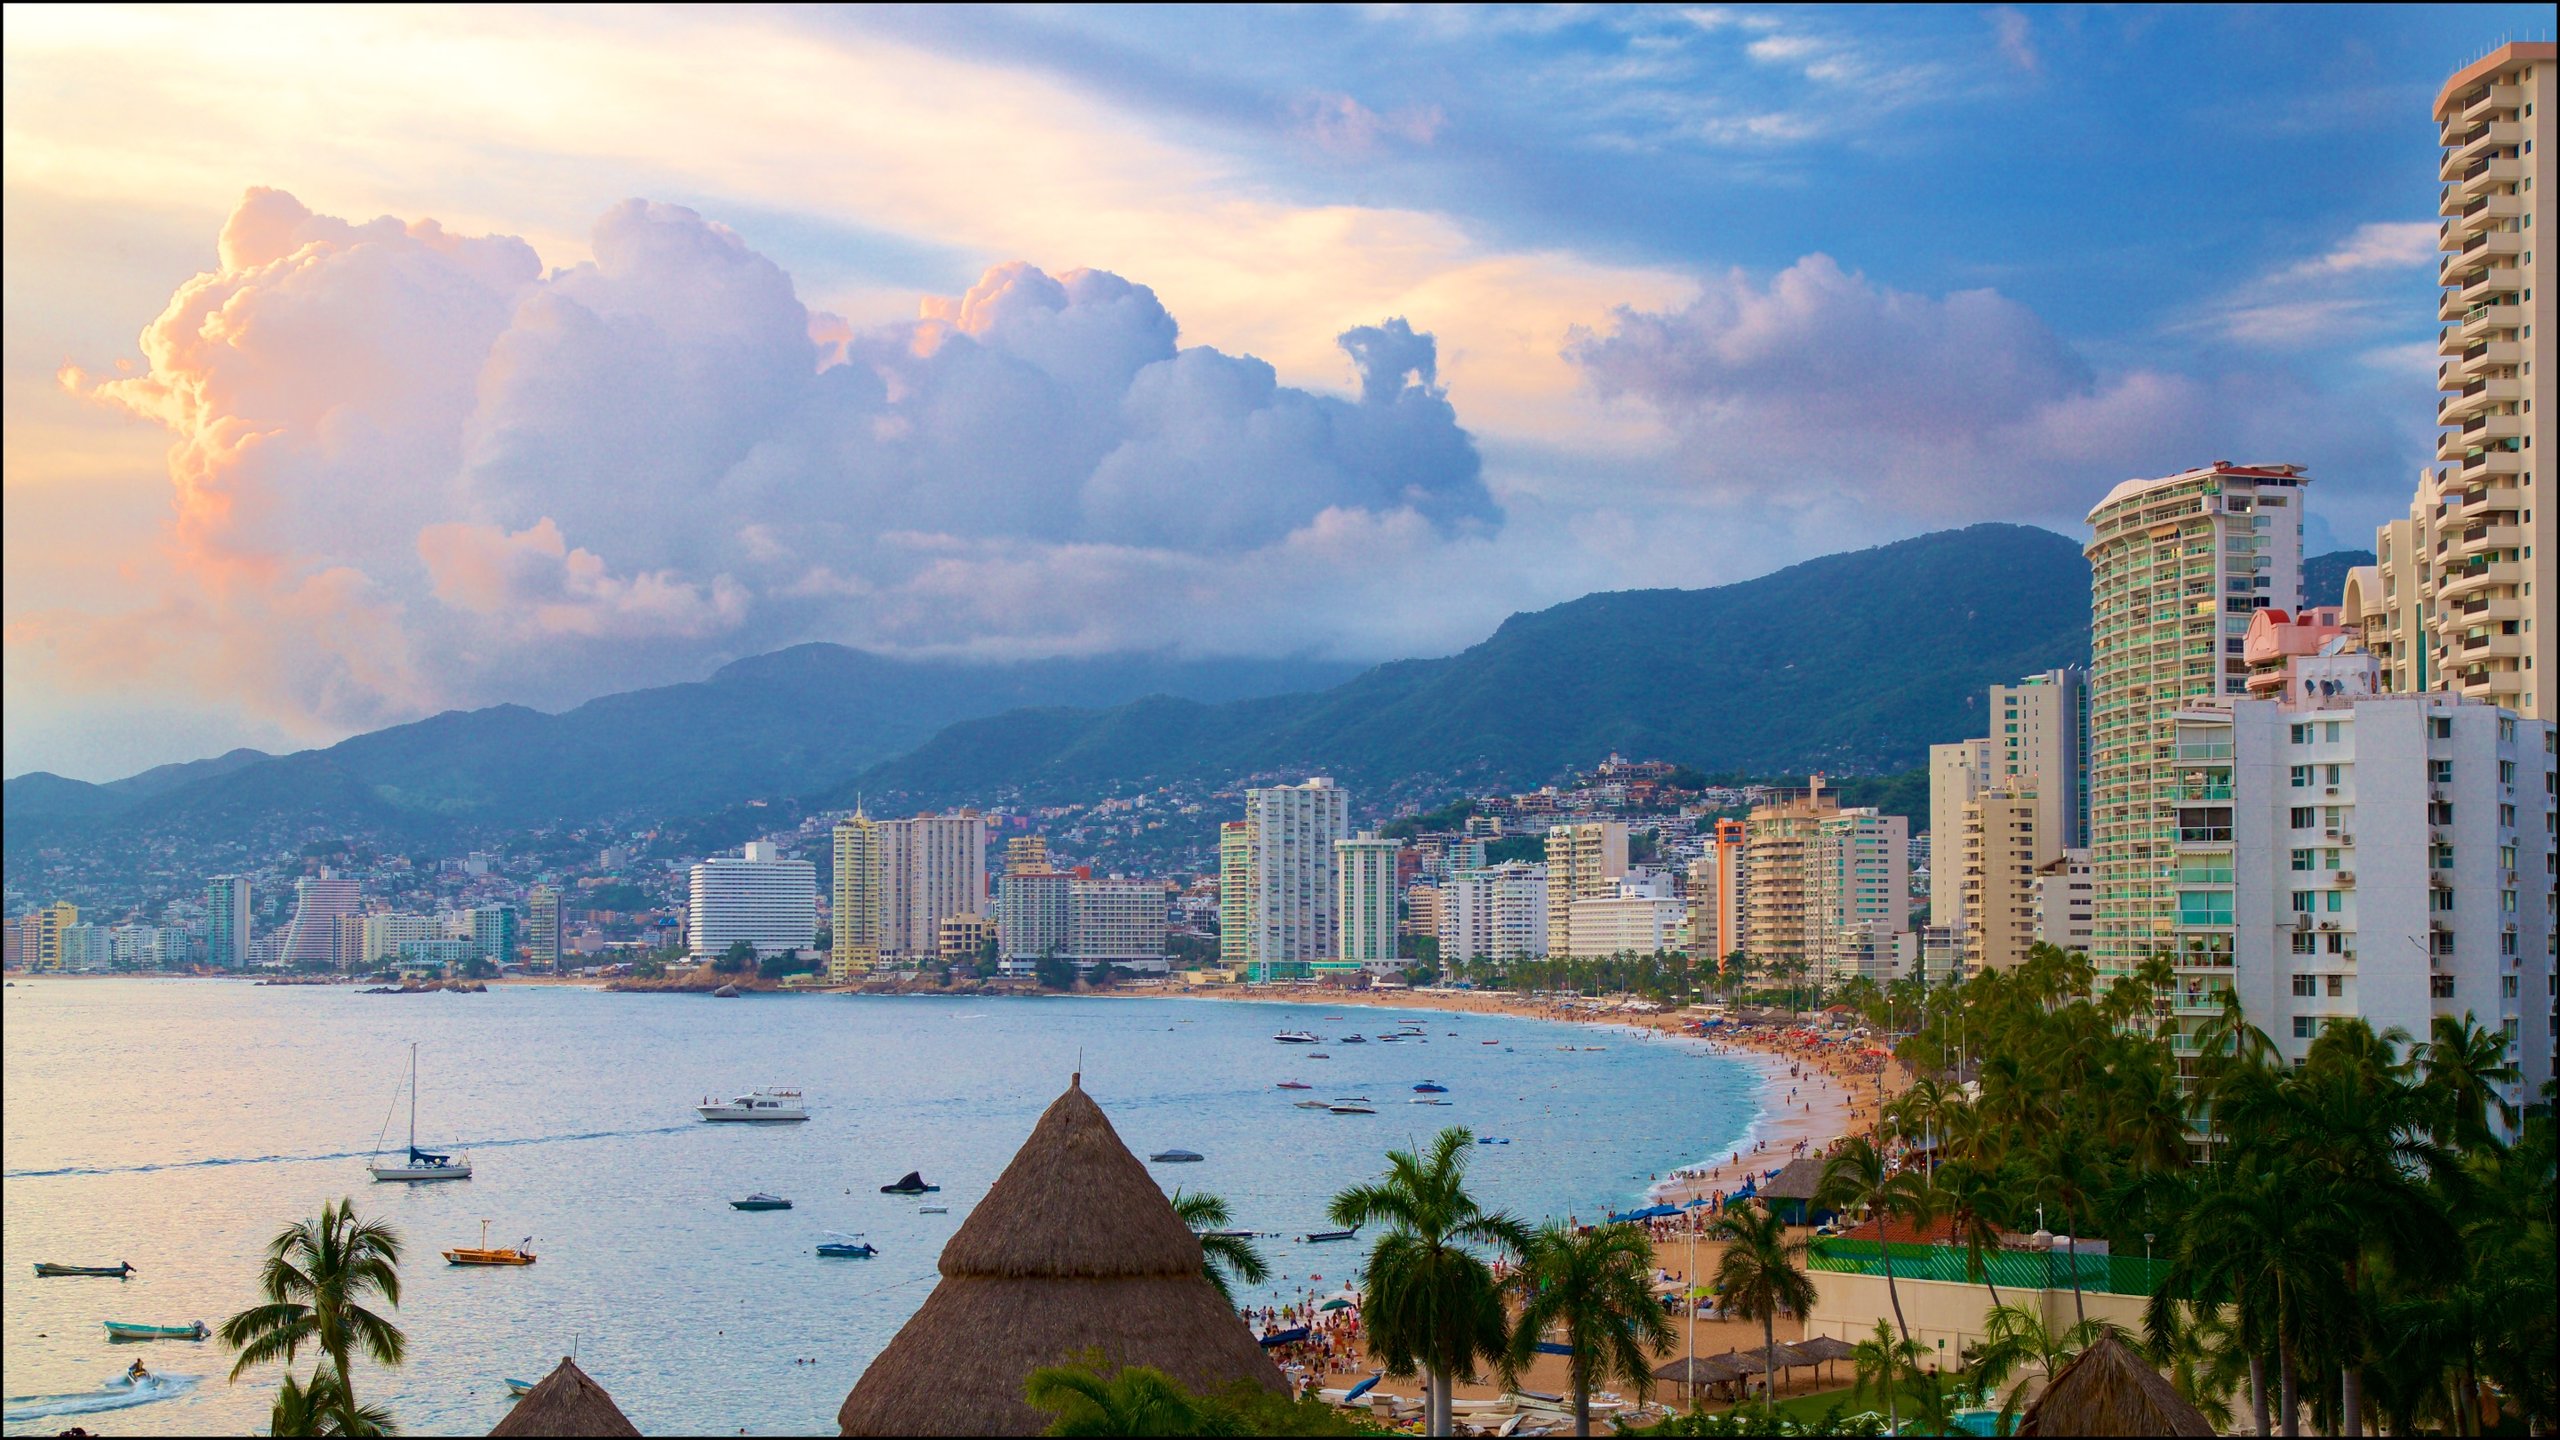 Acapulco Wallpapers